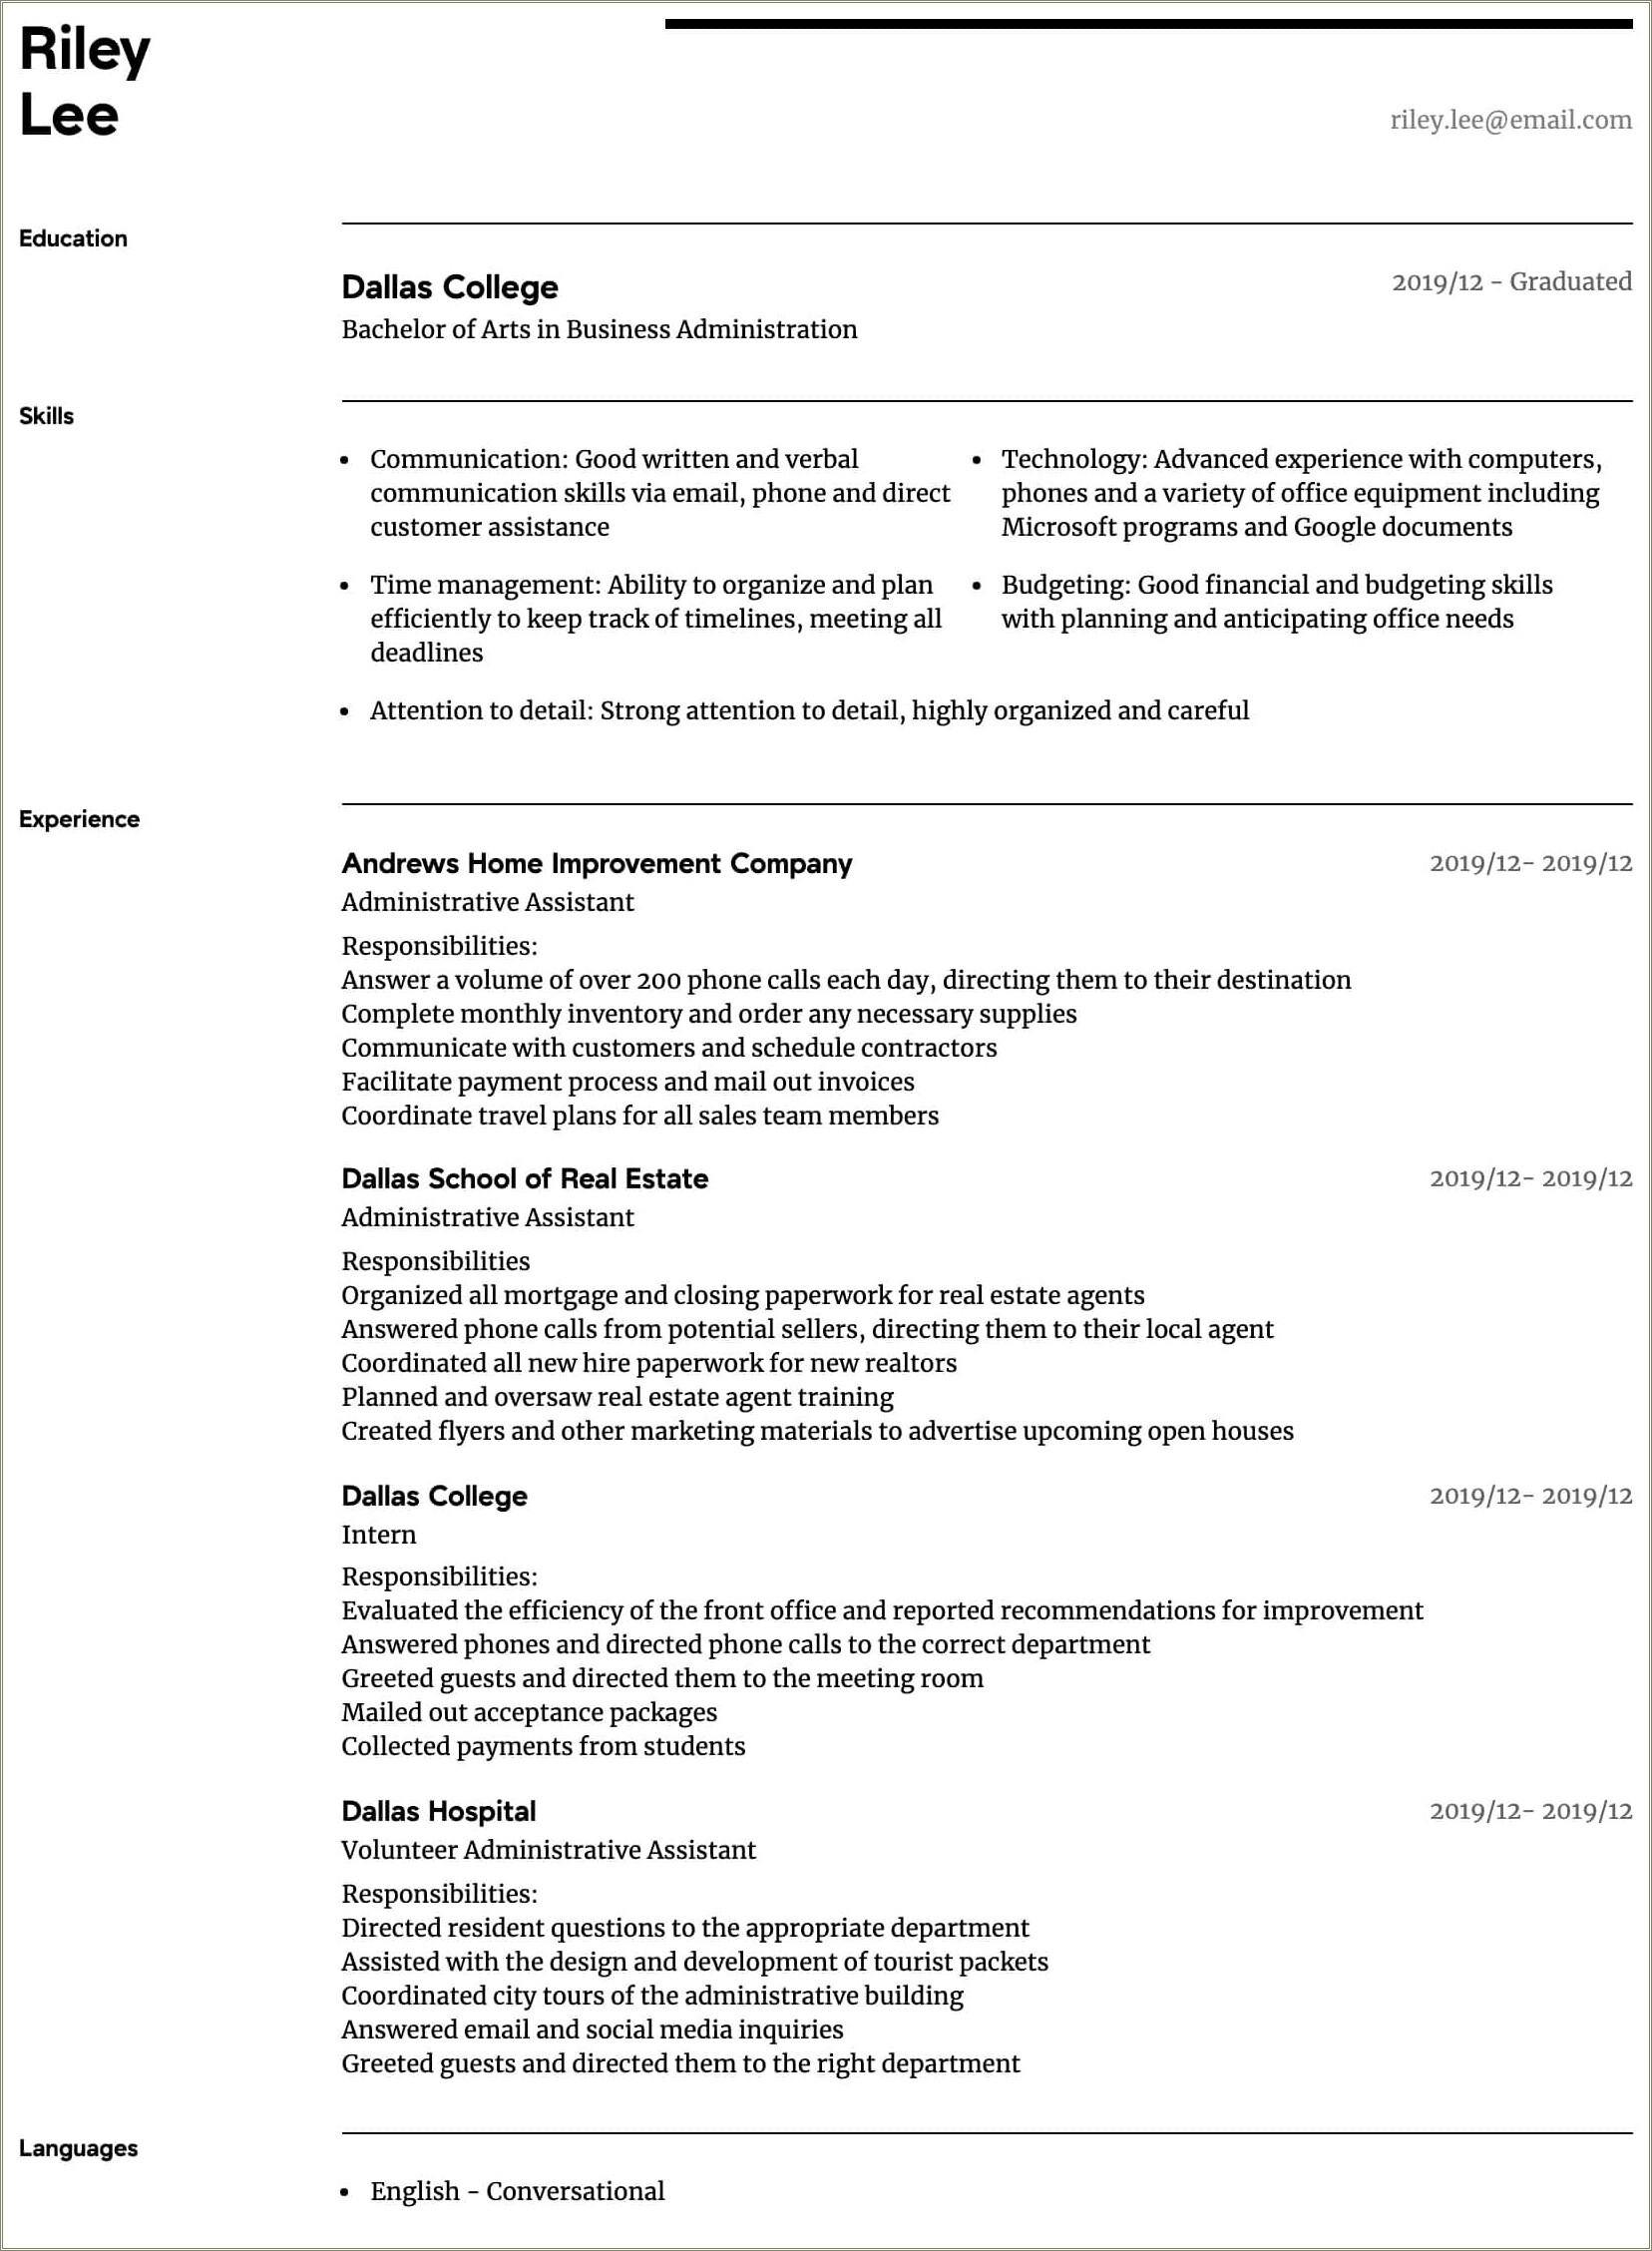 Resume Objective For Real Estate Receptionist